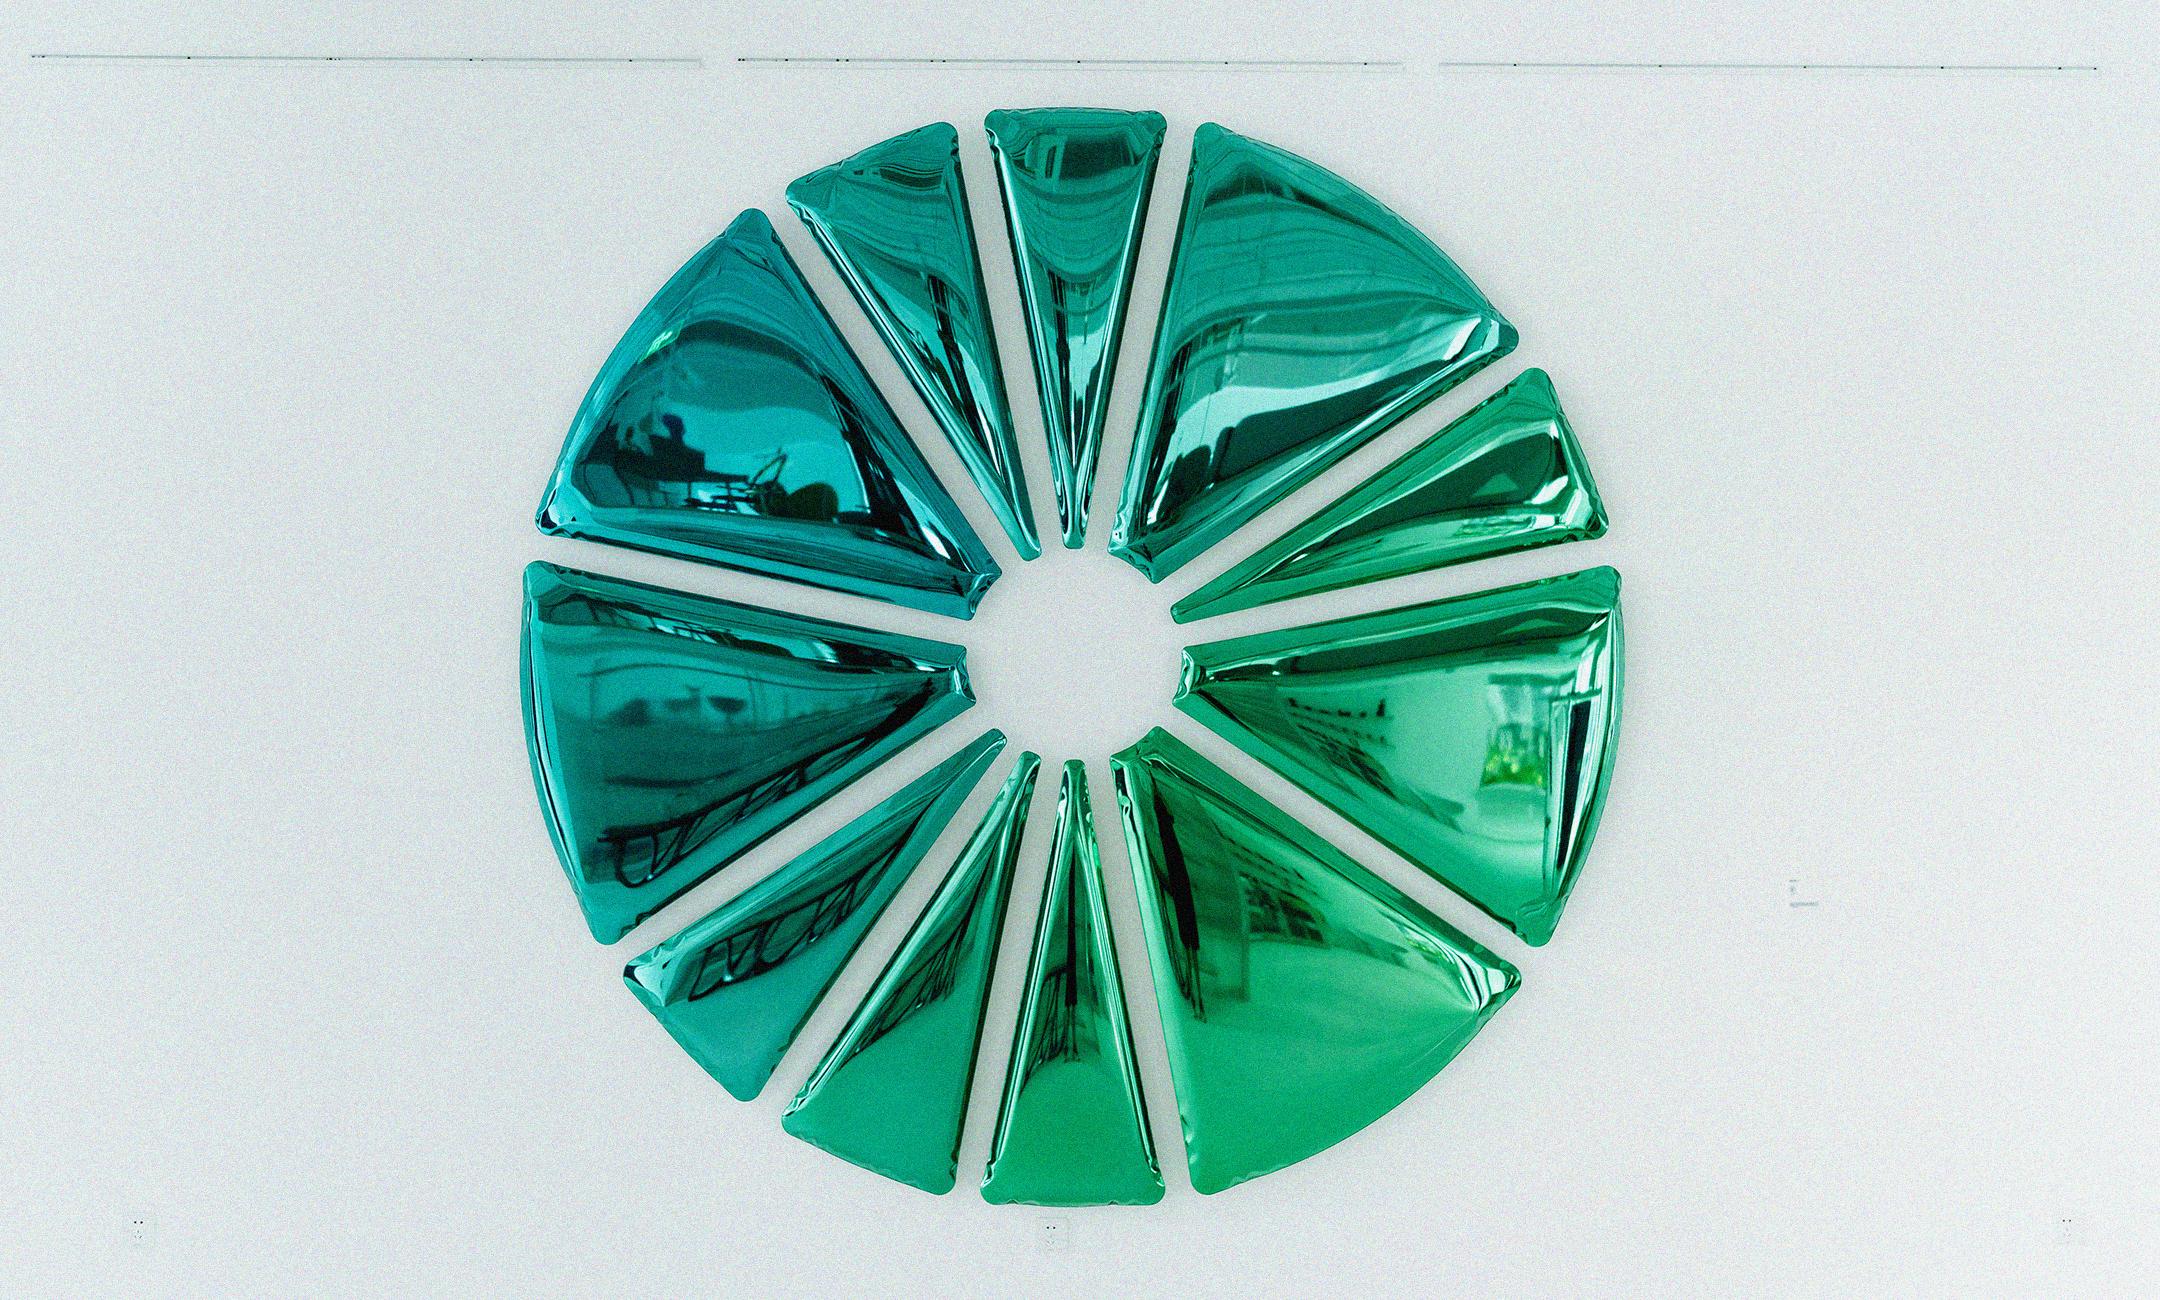 Nucleus 300 Polished Gradient of Emerald and Sapphire Color Stainless Steel Wall For Sale 1